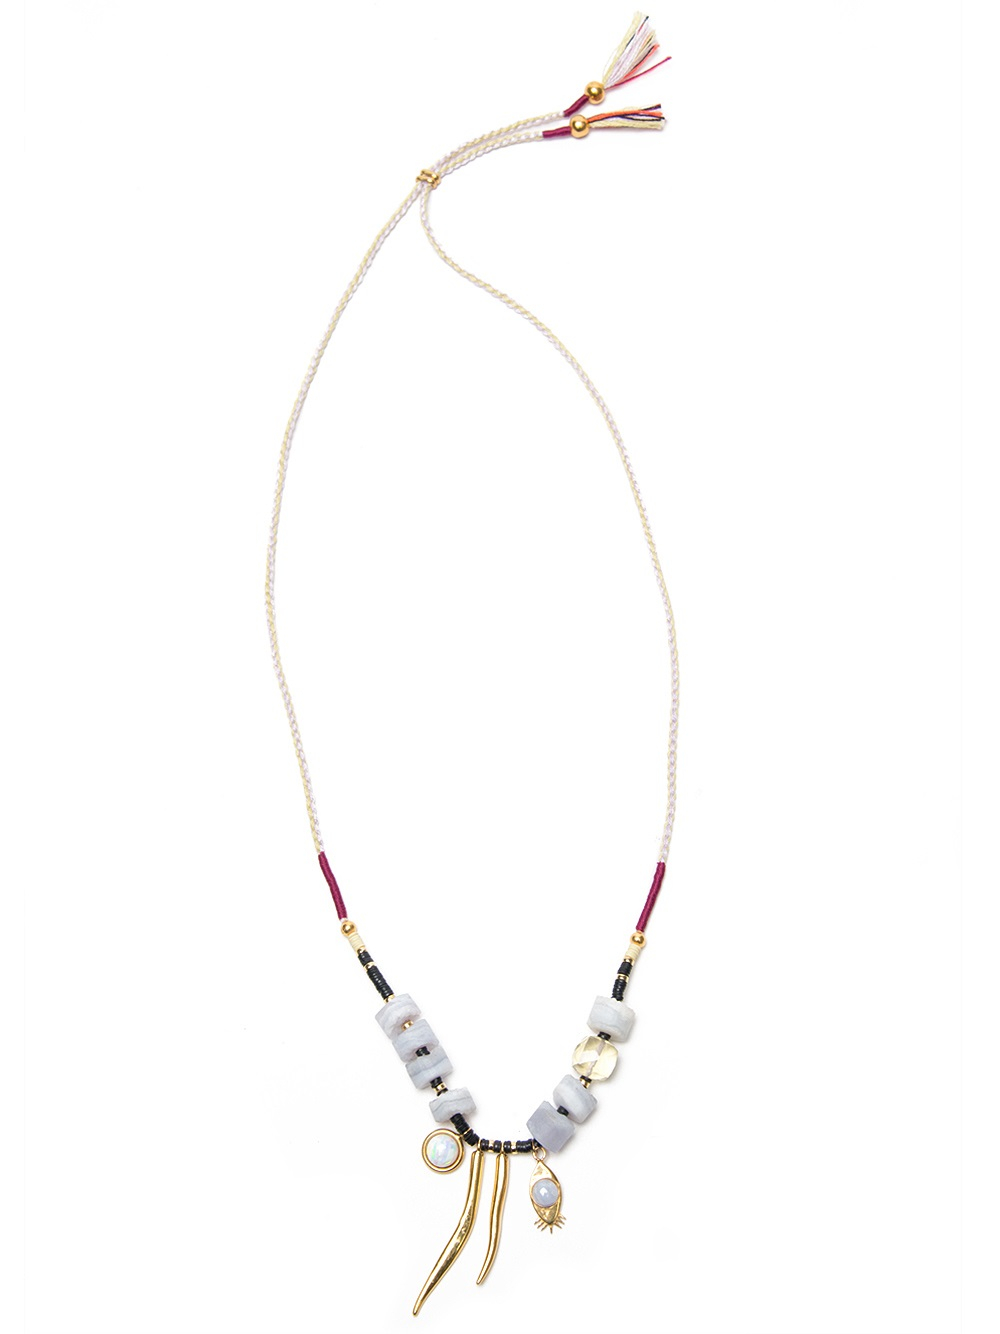 Lyst - Lizzie Fortunato Amulet Horn and Eye Necklace in White